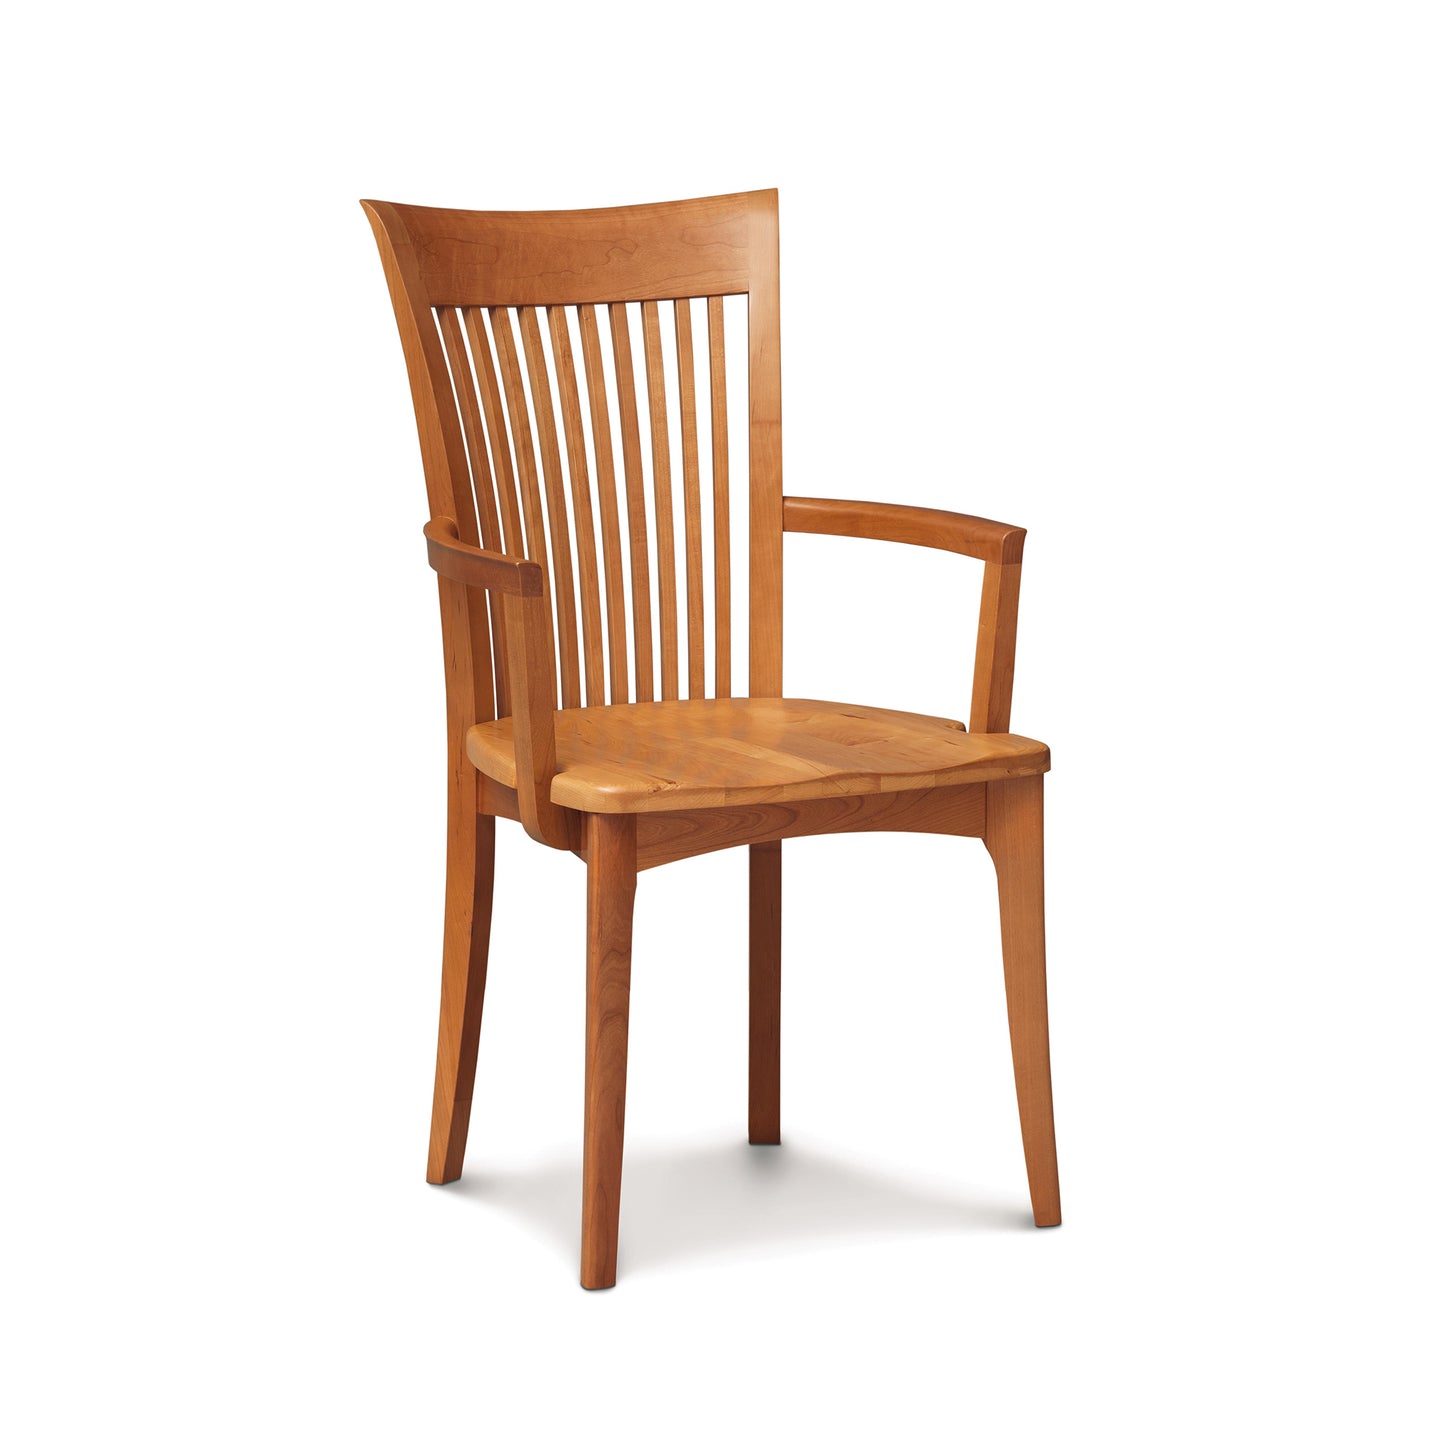 A Sarah Shaker Cherry Chair with Wooden Seat from Copeland Furniture, with vertical slats and armrests, crafted from American cherry wood against a white background.